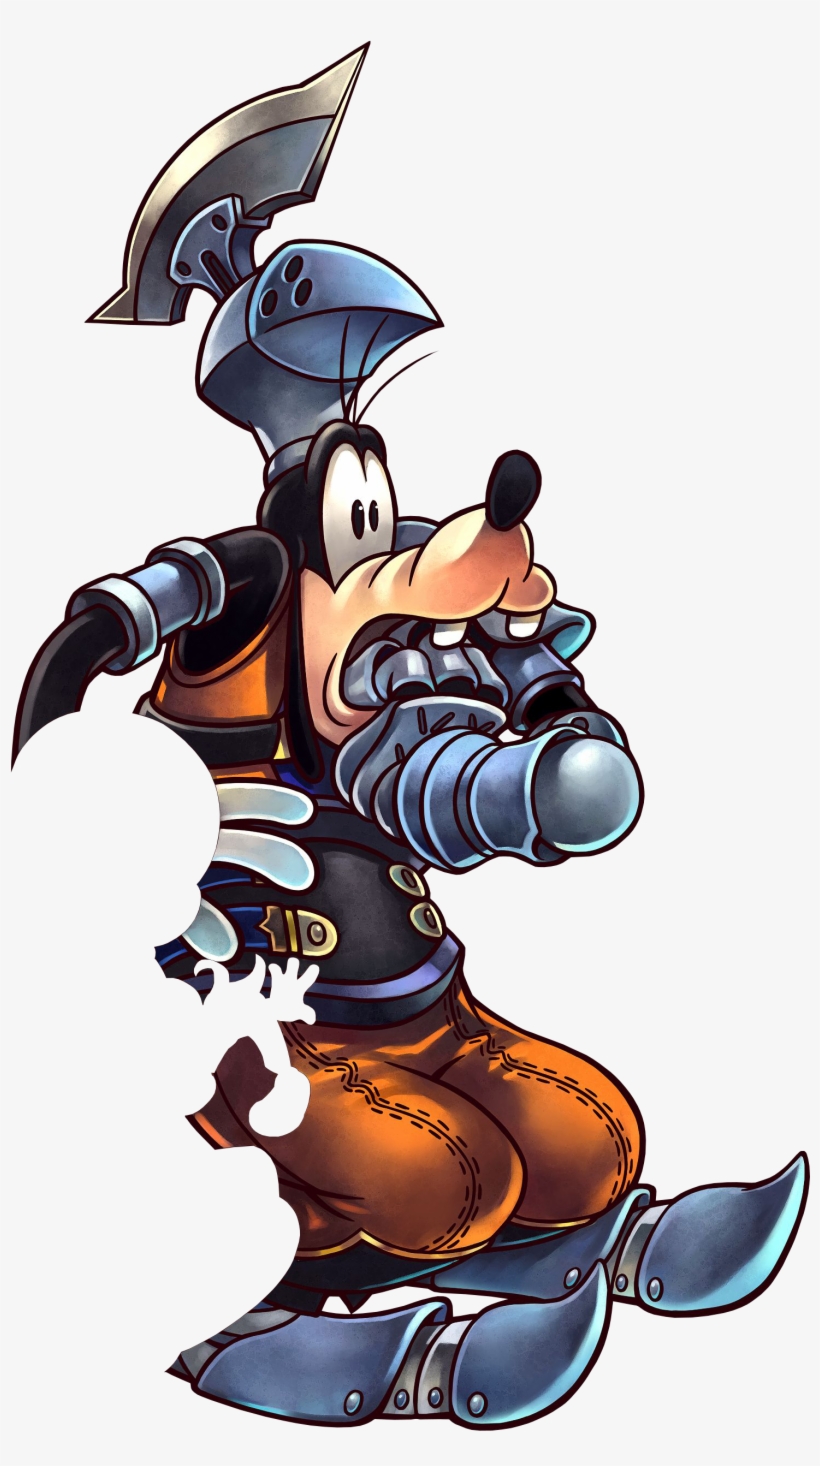 Goofy01 Hearts Re Coded PNG Image. Transparent PNG Free Download on SeekPNG